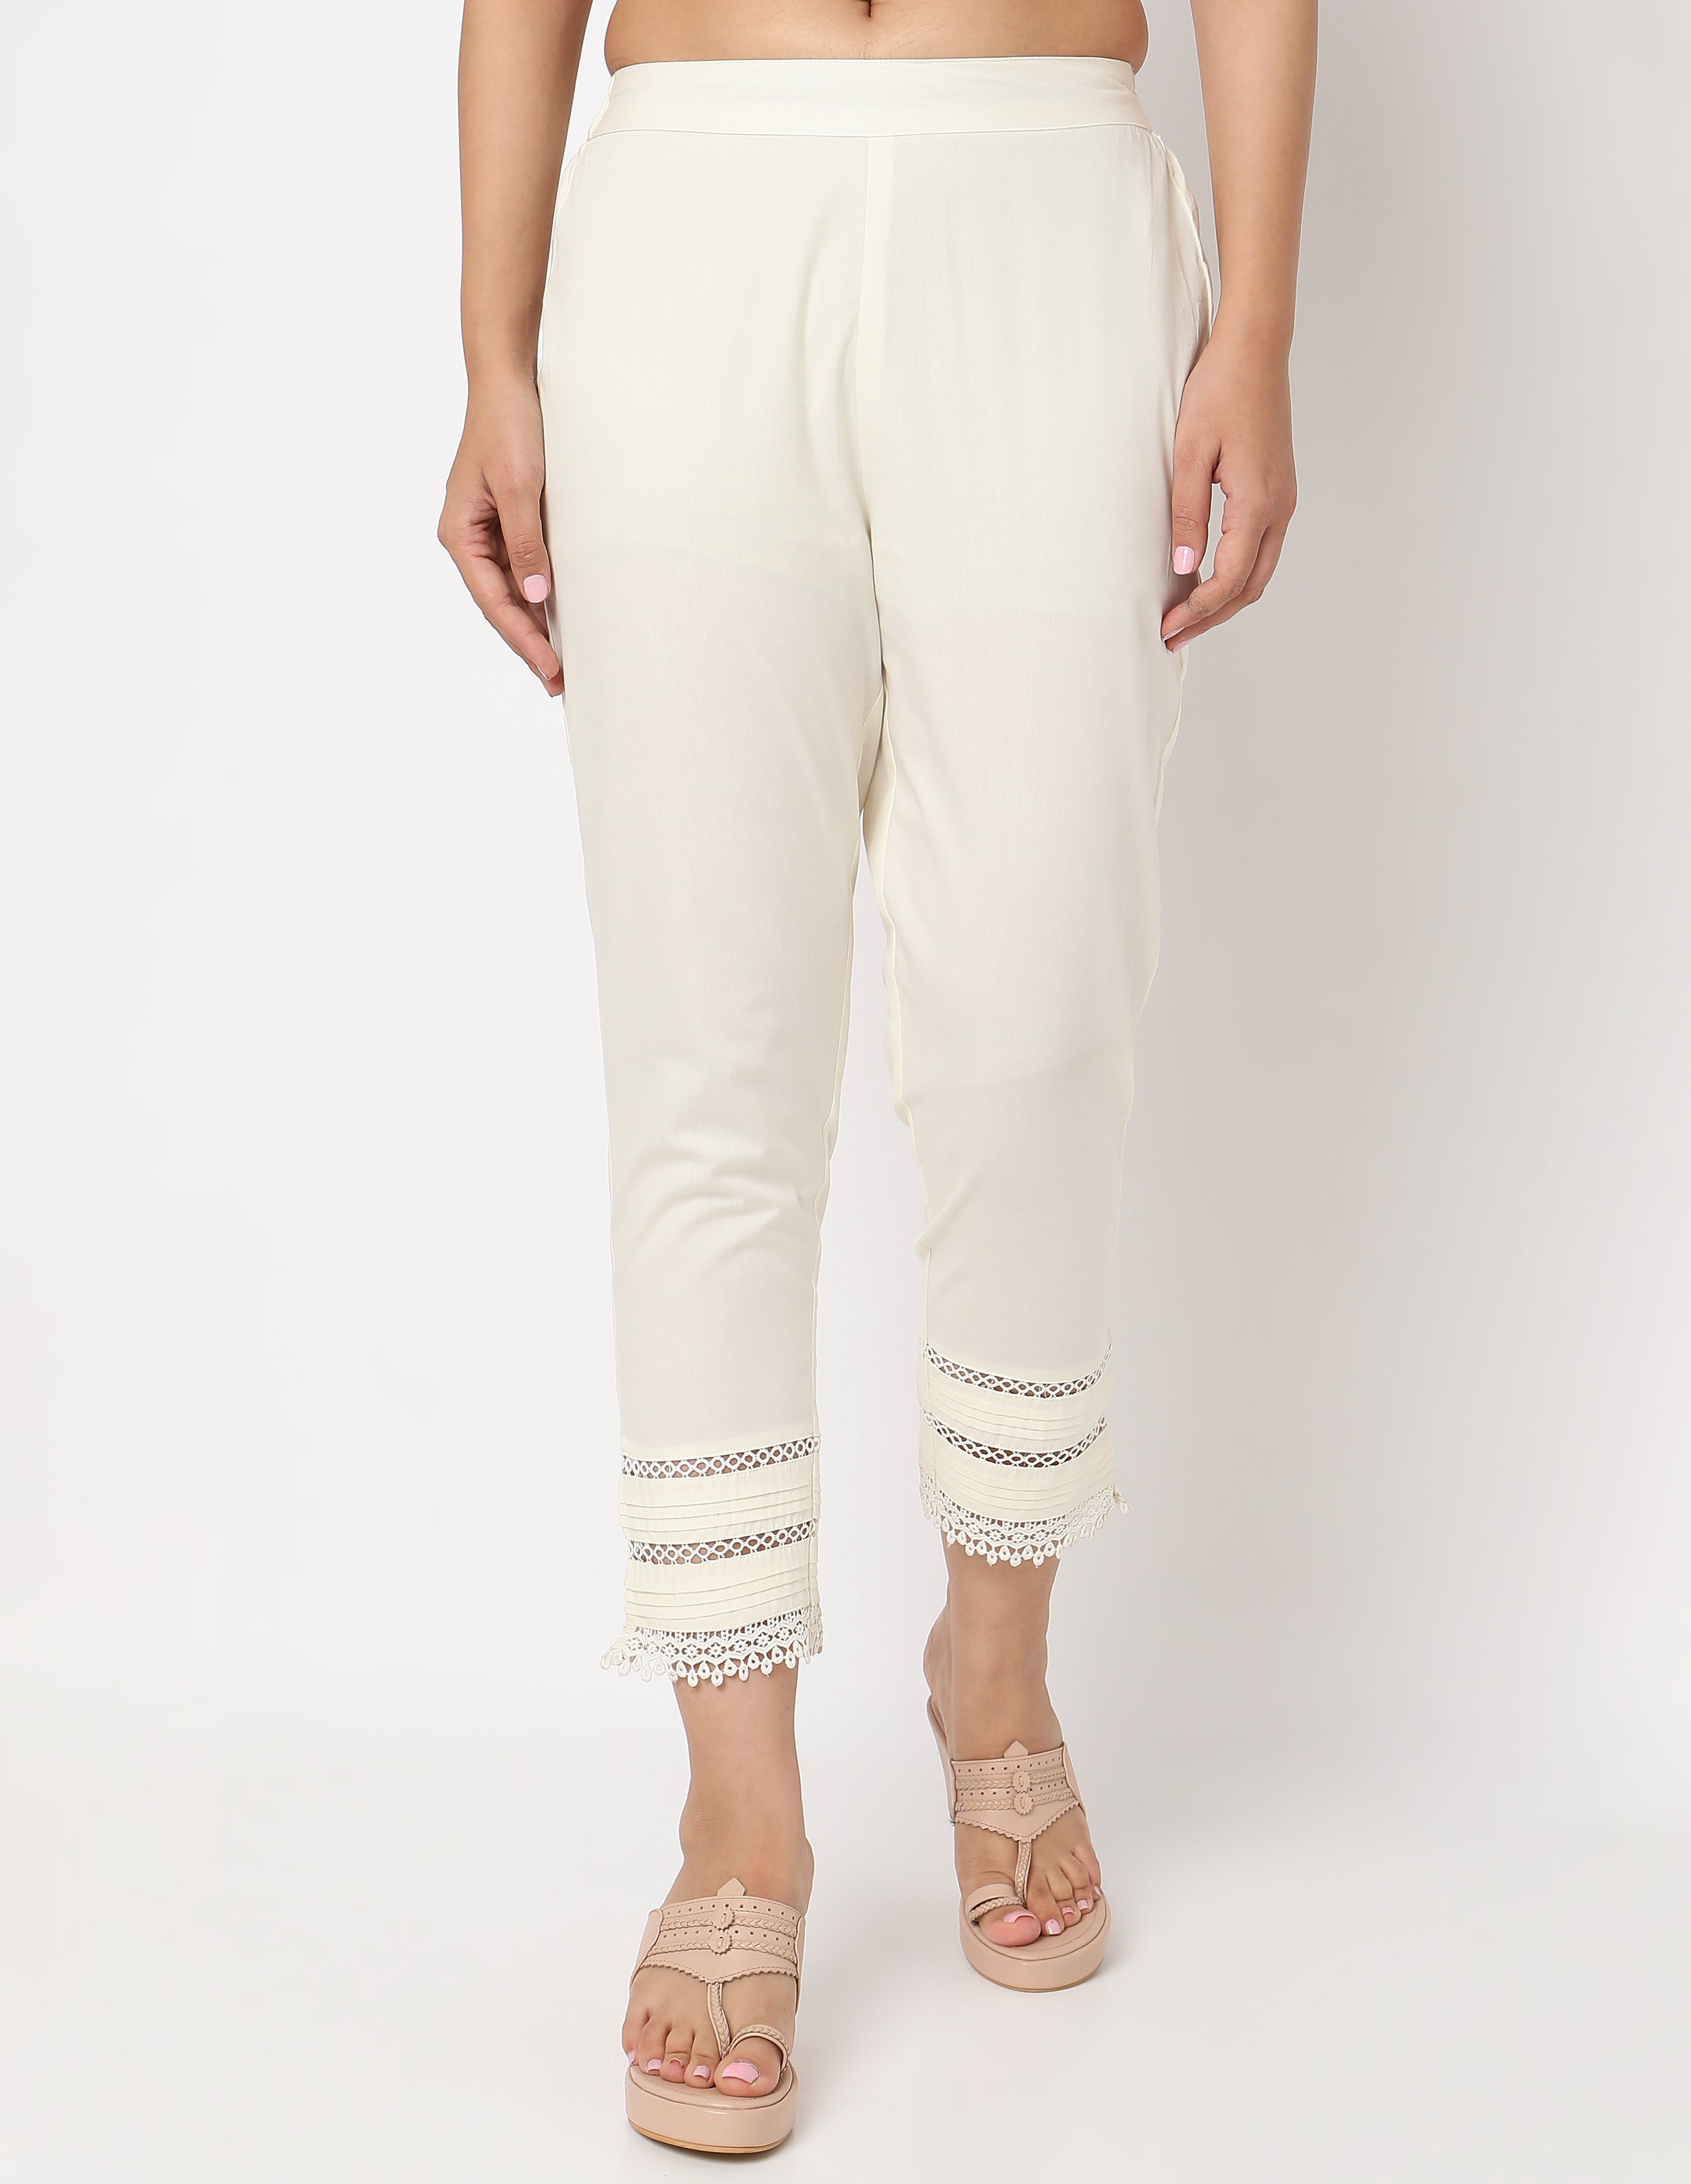 Buy Off White Trousers & Pants for Men by MAX Online | Ajio.com